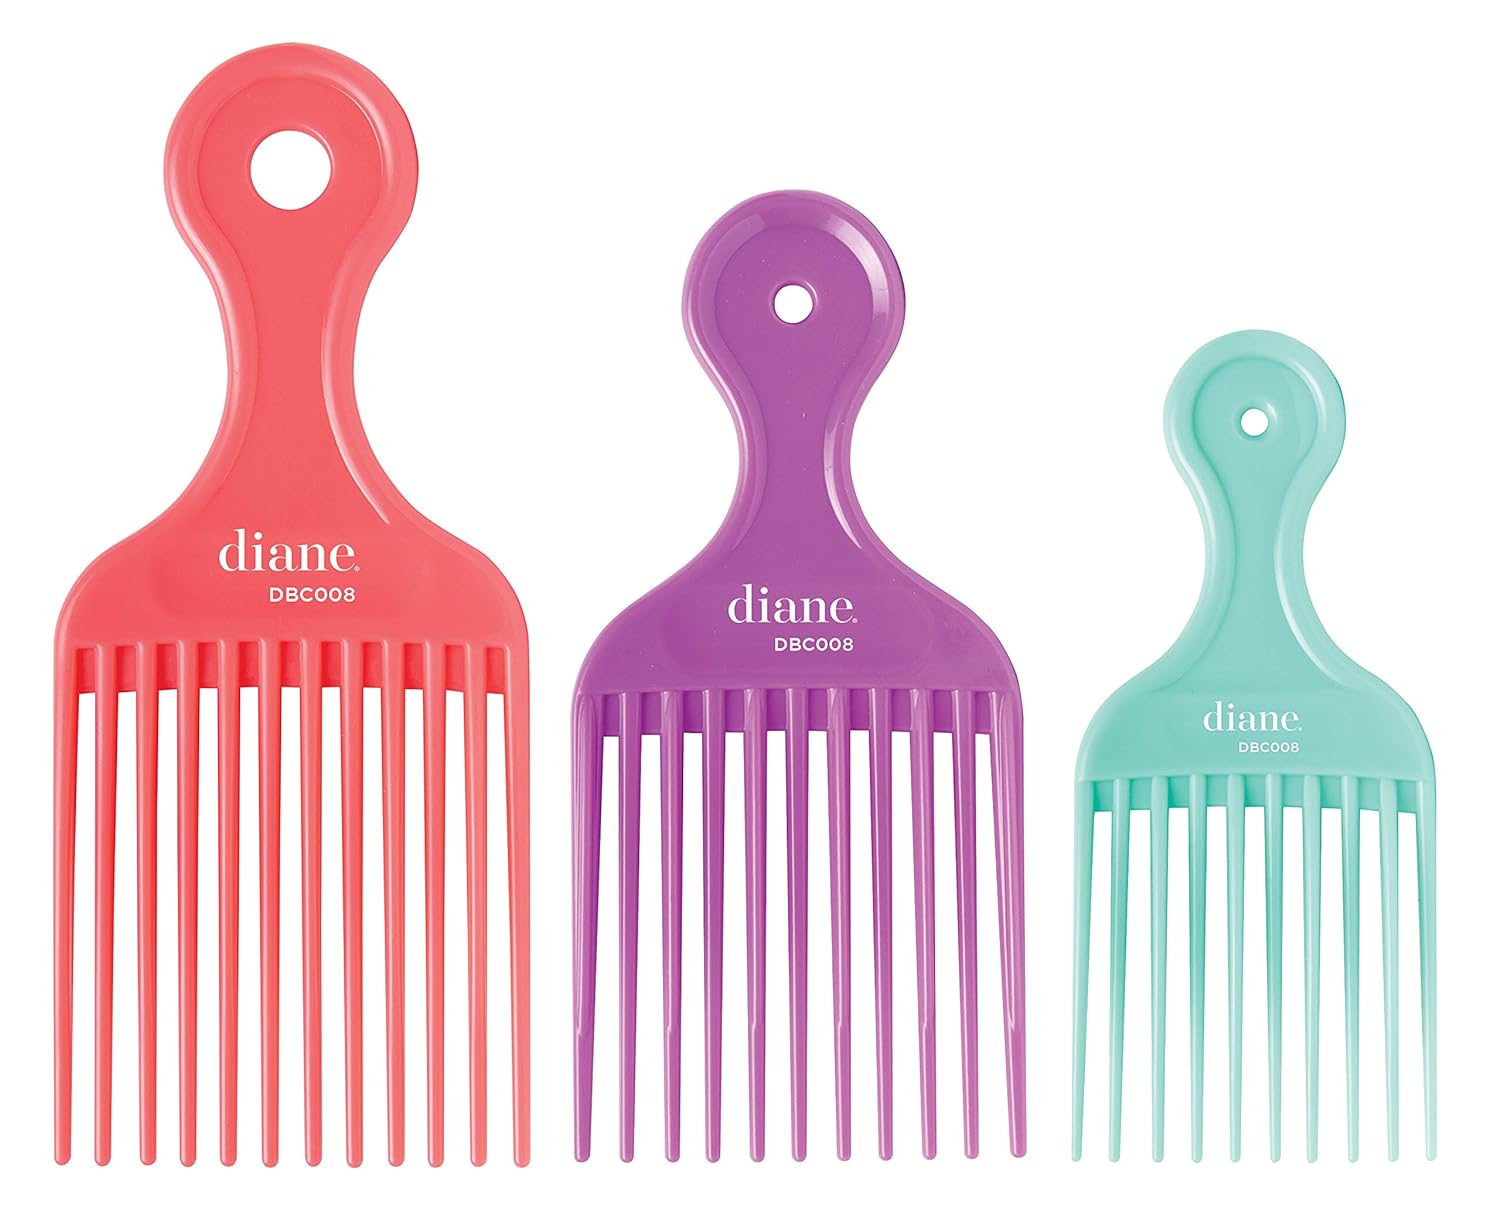 Diane DBC008 Assorted Lift Combs - 3 PC Set : Beauty & Personal Care